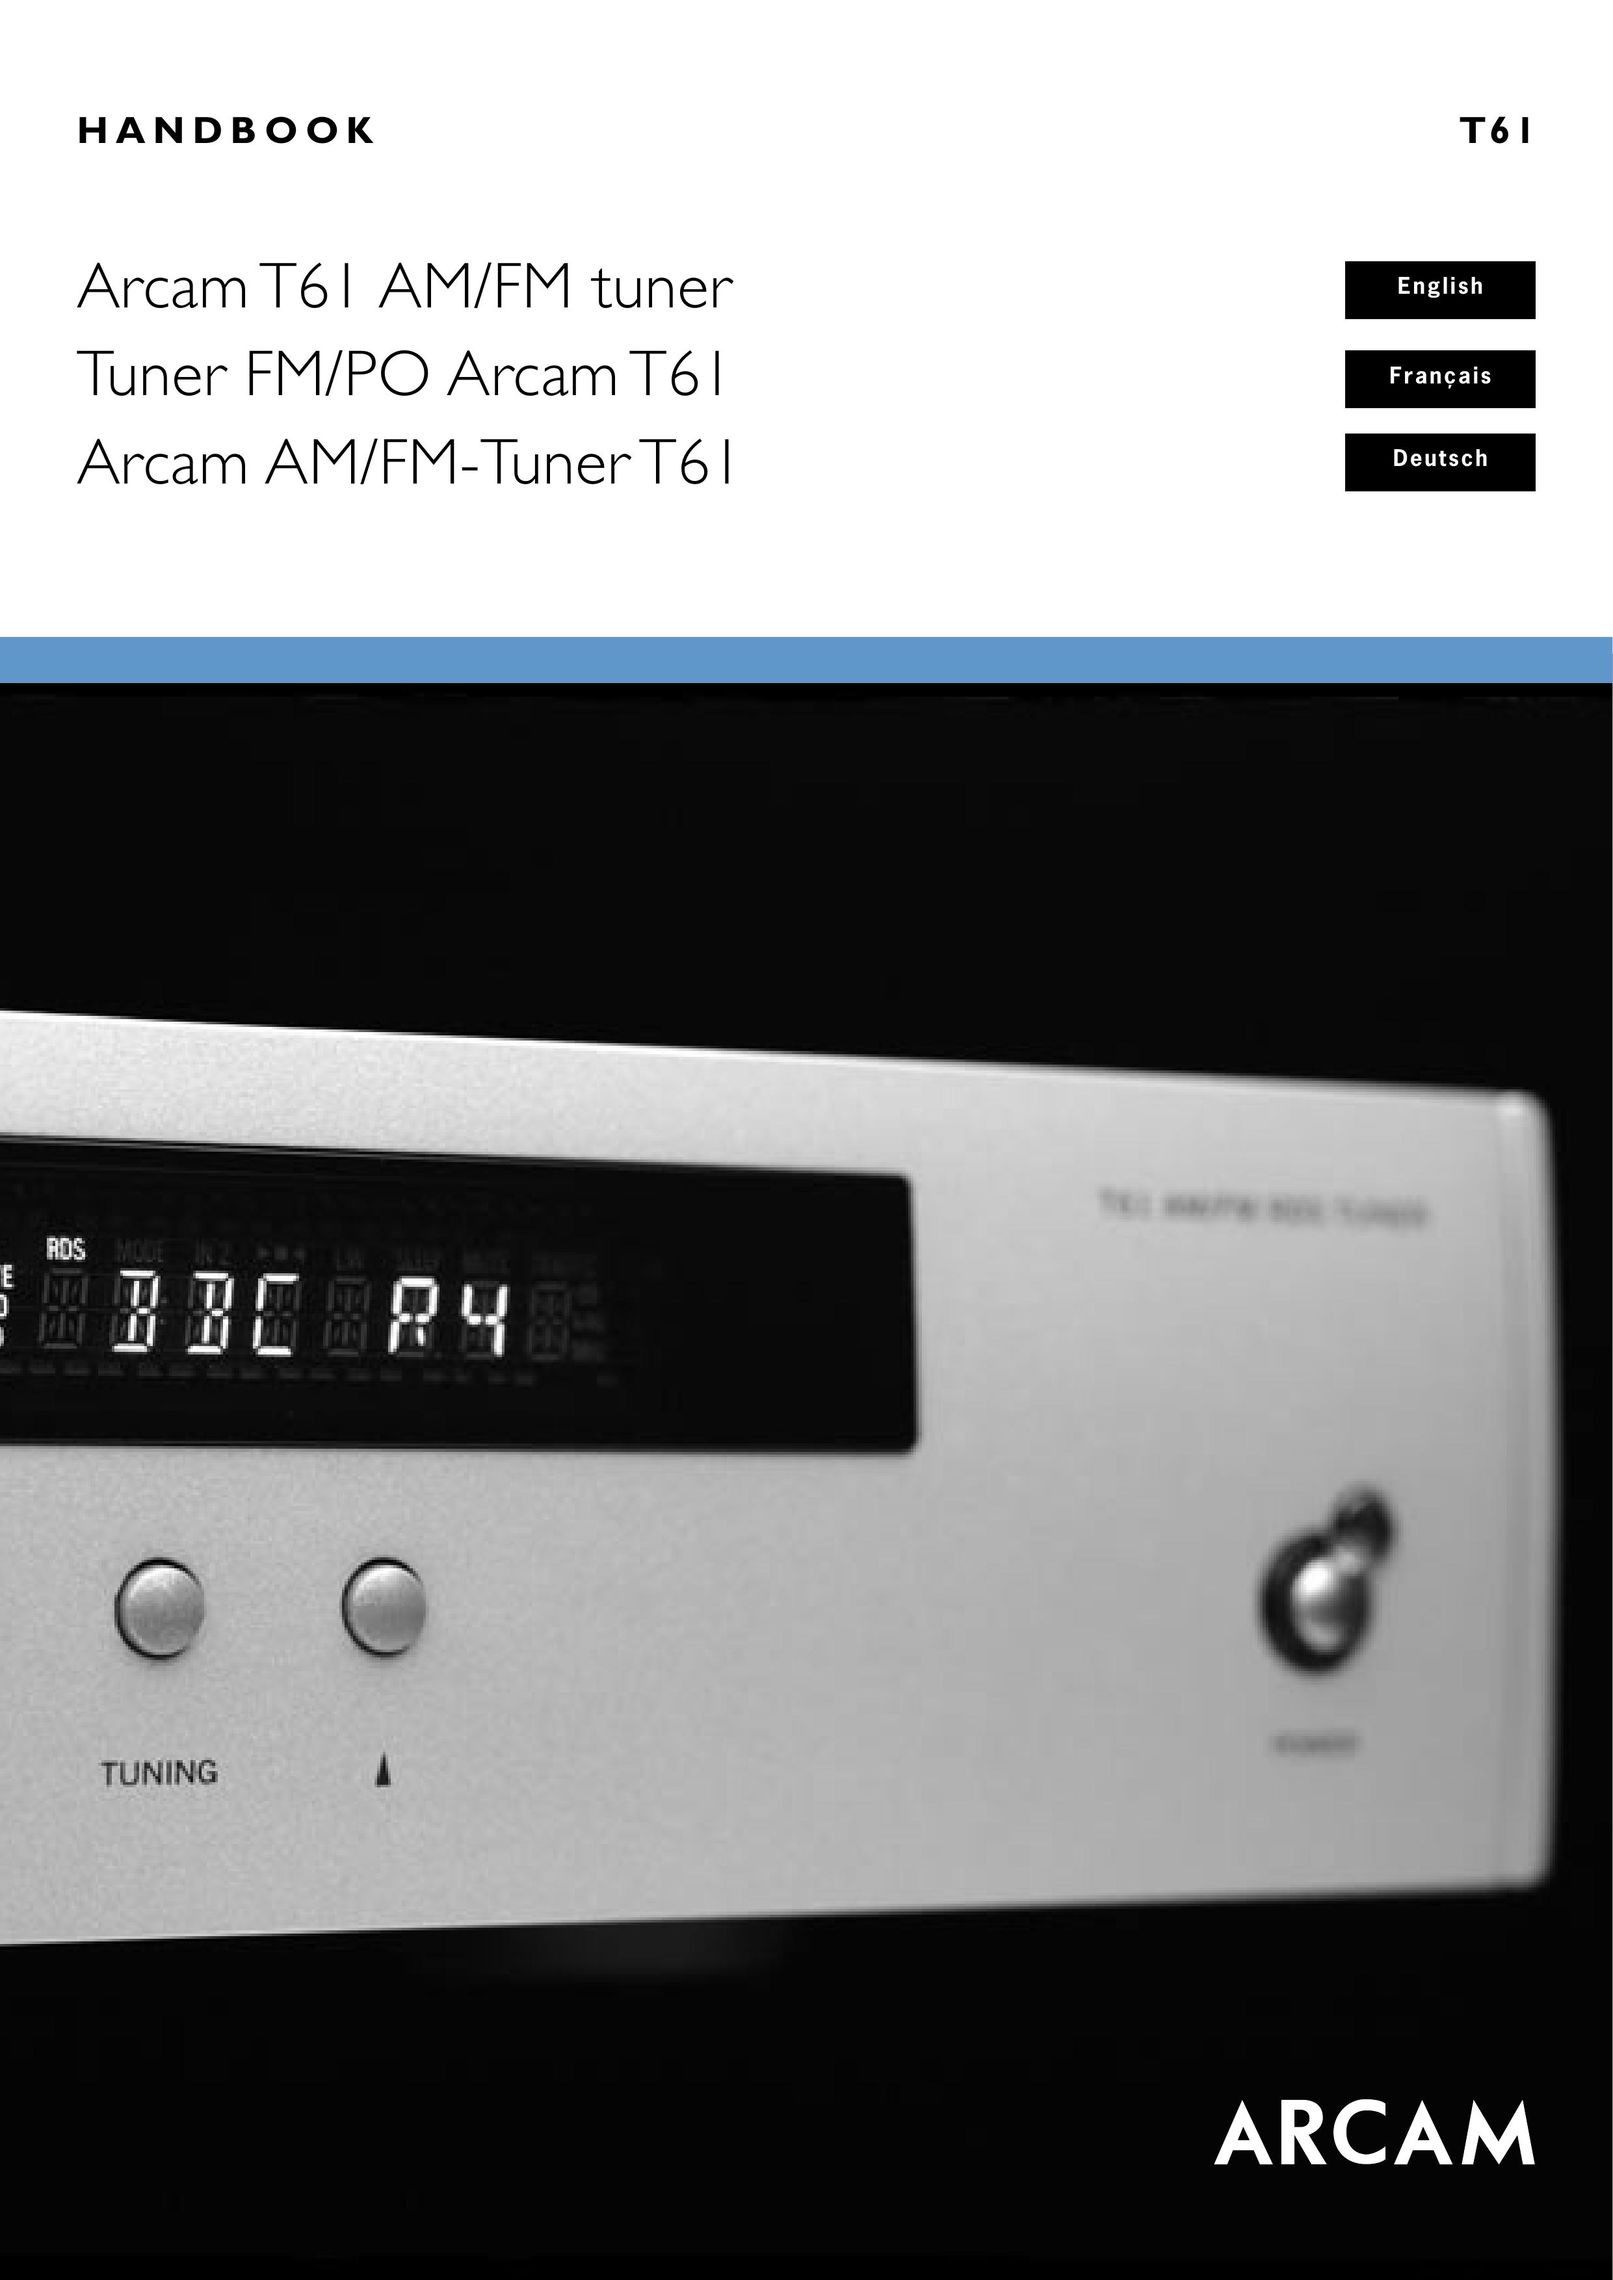 Arcam AM/FM Tuner T61 Stereo System User Manual